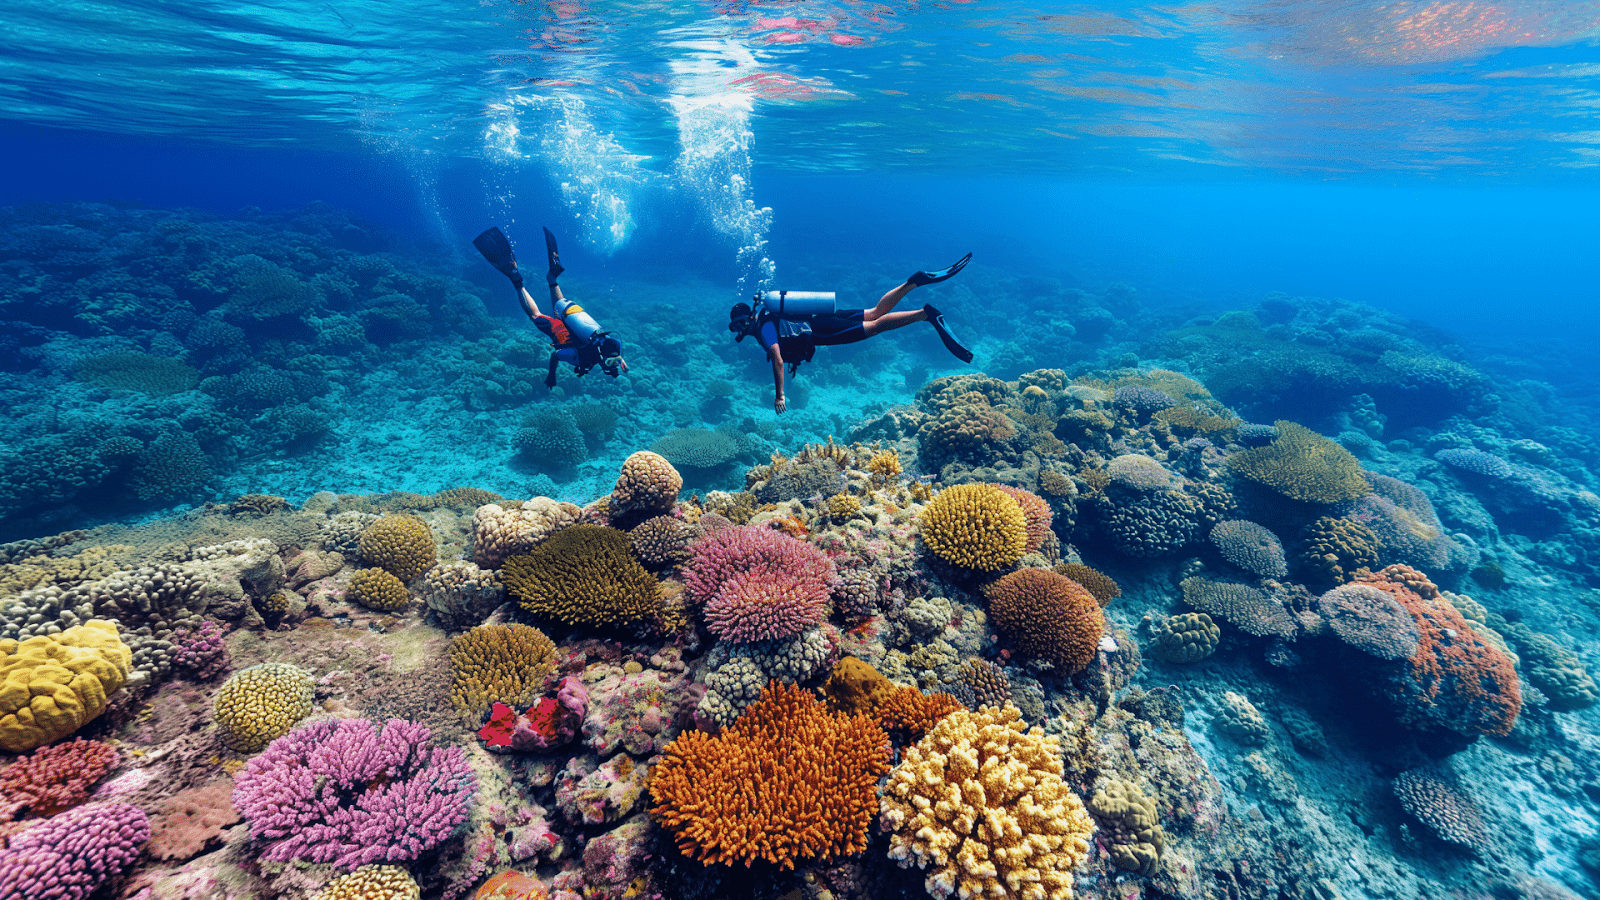 Scuba divers explore the vibrant coral reefs of Tubbataha Reefs in the Philippines, a popular destination in Asia for marine beauty